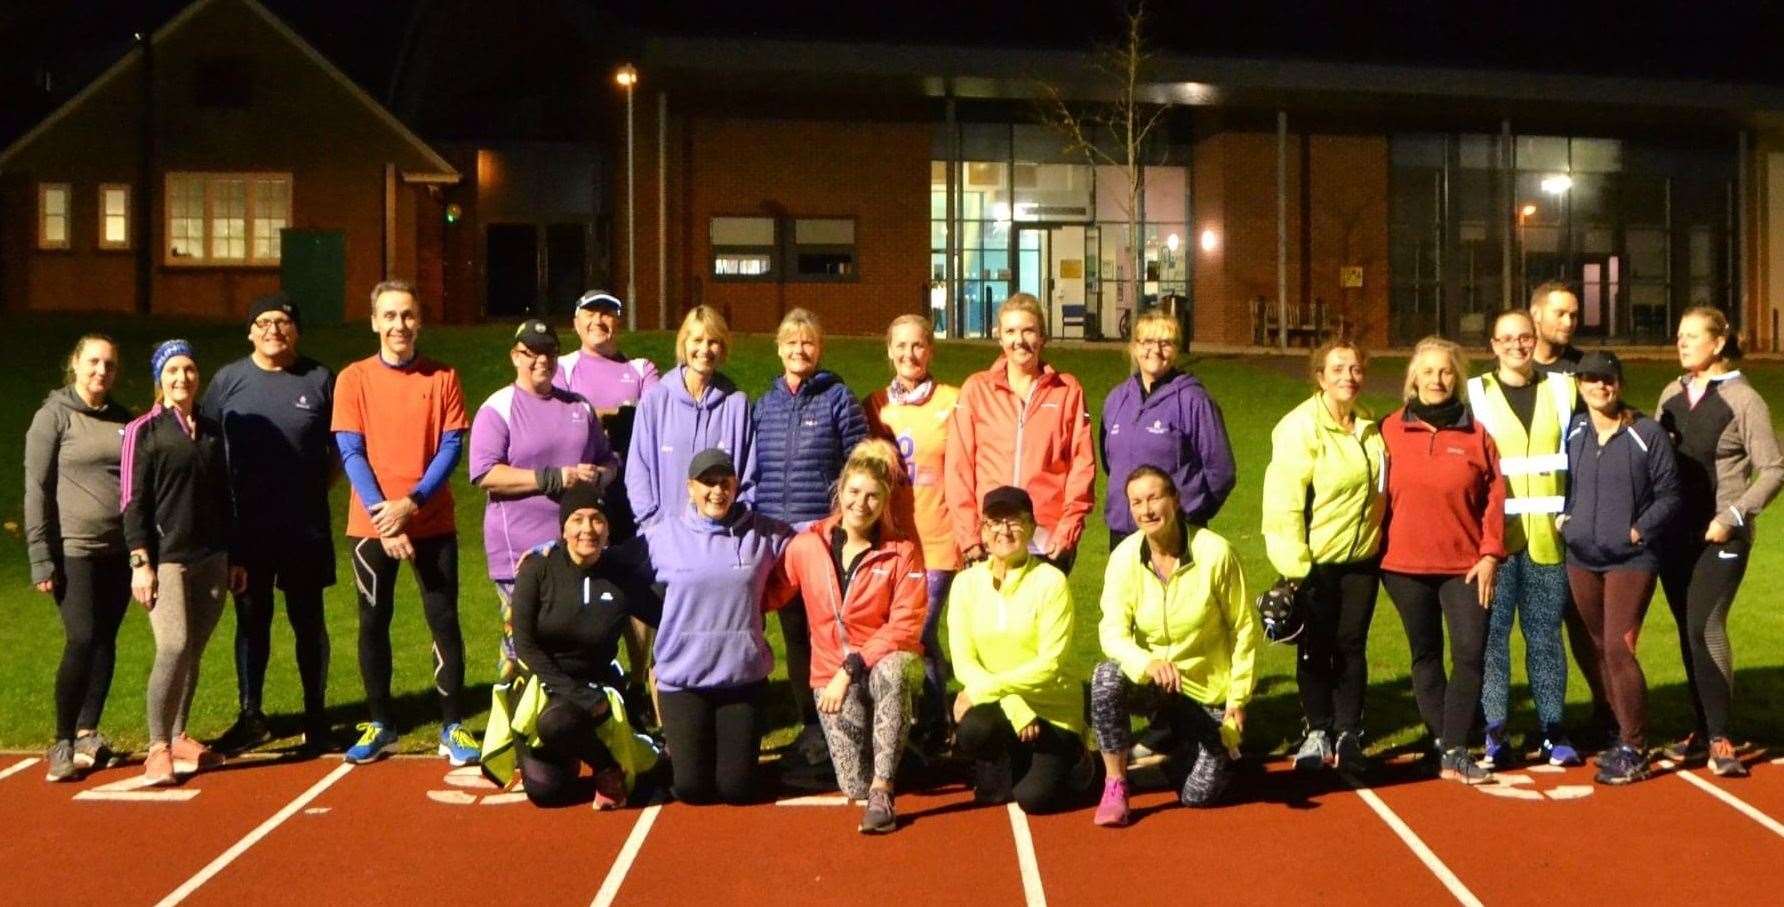 Hawkinge Hurricane Running Club, which has nearly 200 members in total, has been shortlisted for an England Athletics award